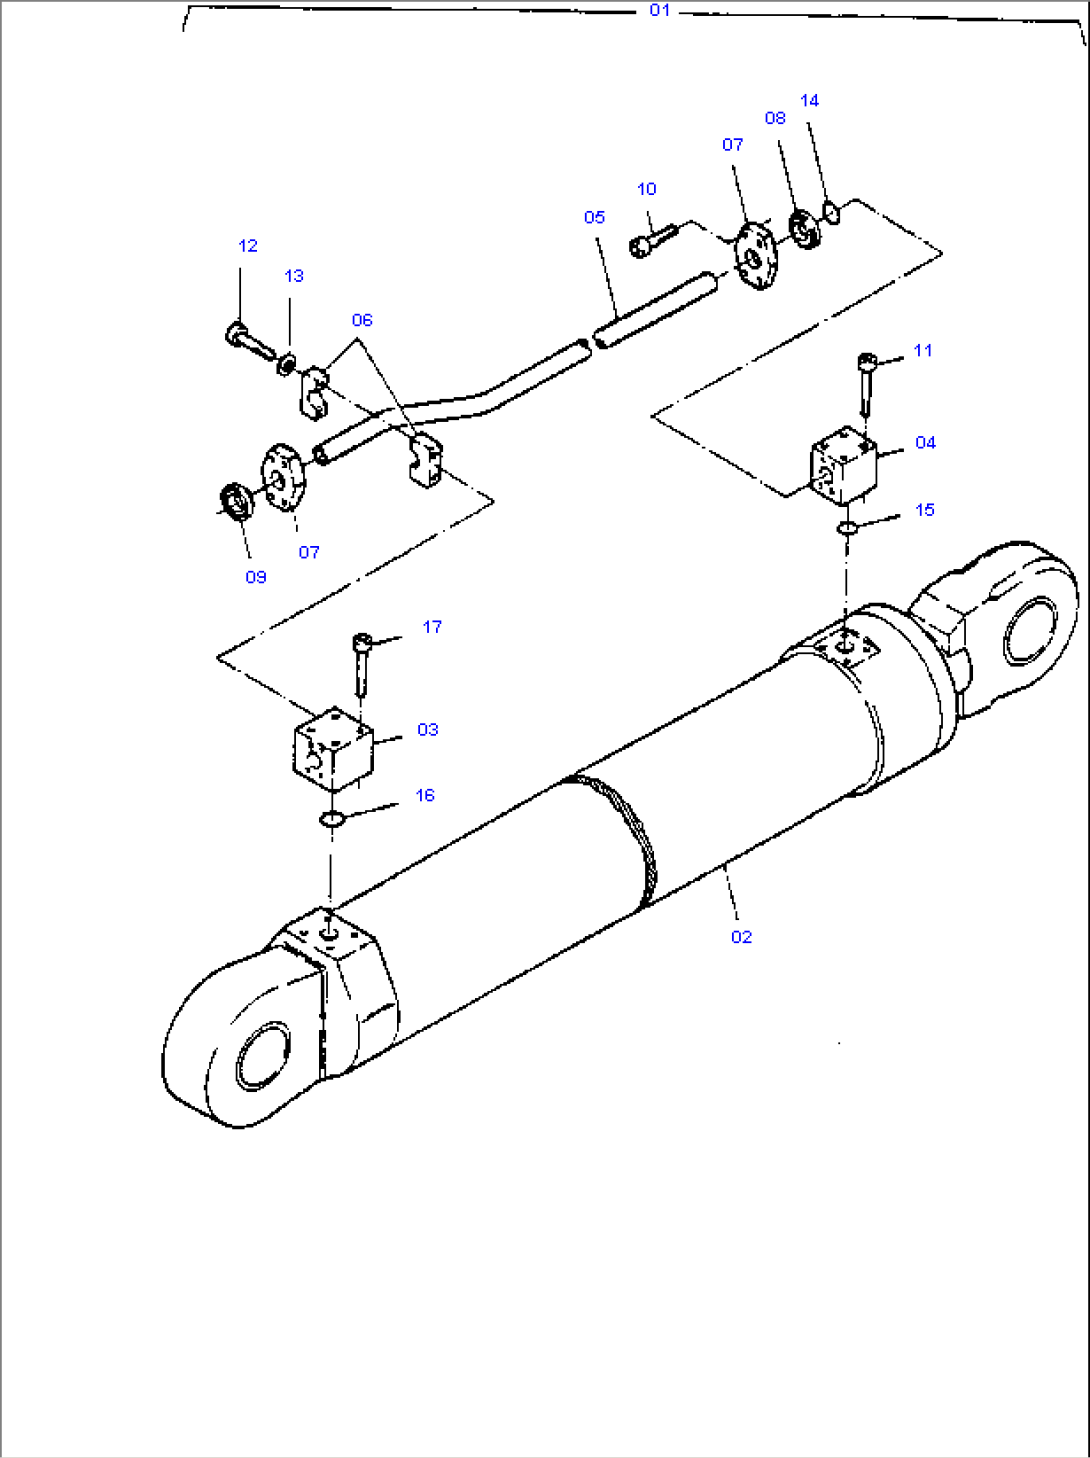 Stick Cylinder with Piping